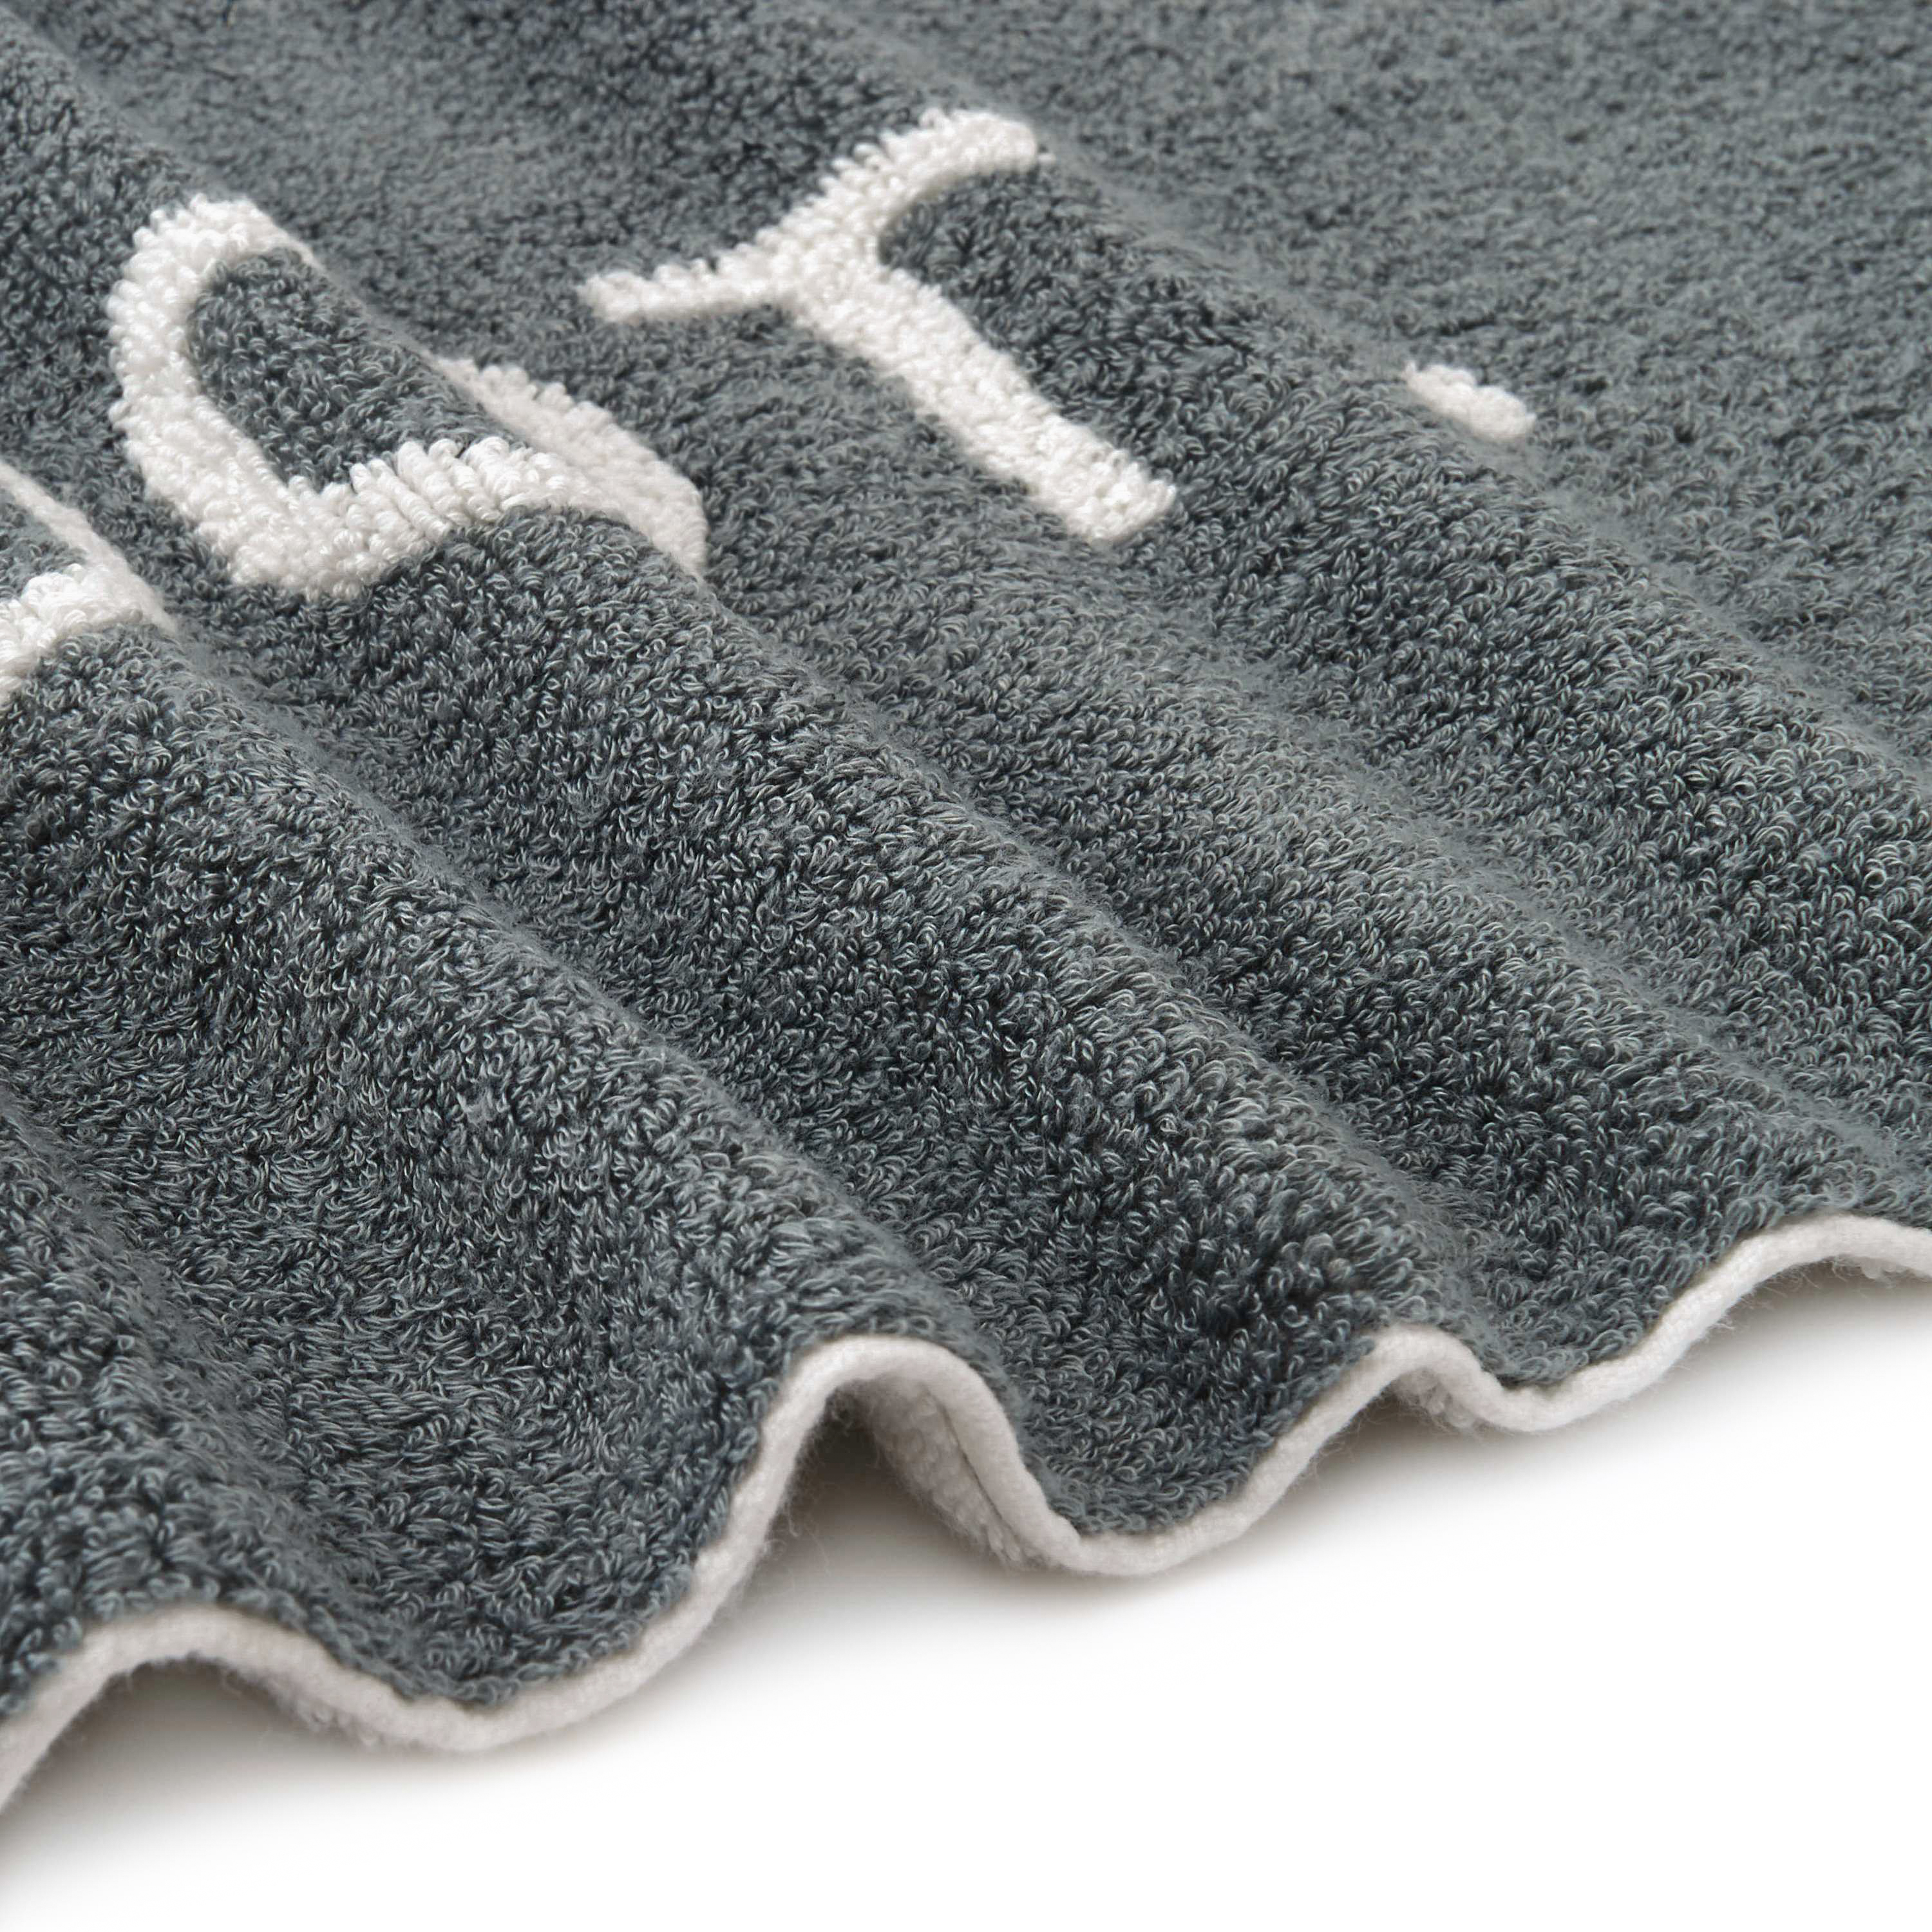 BATH MAT / DRY YOUR FOOT